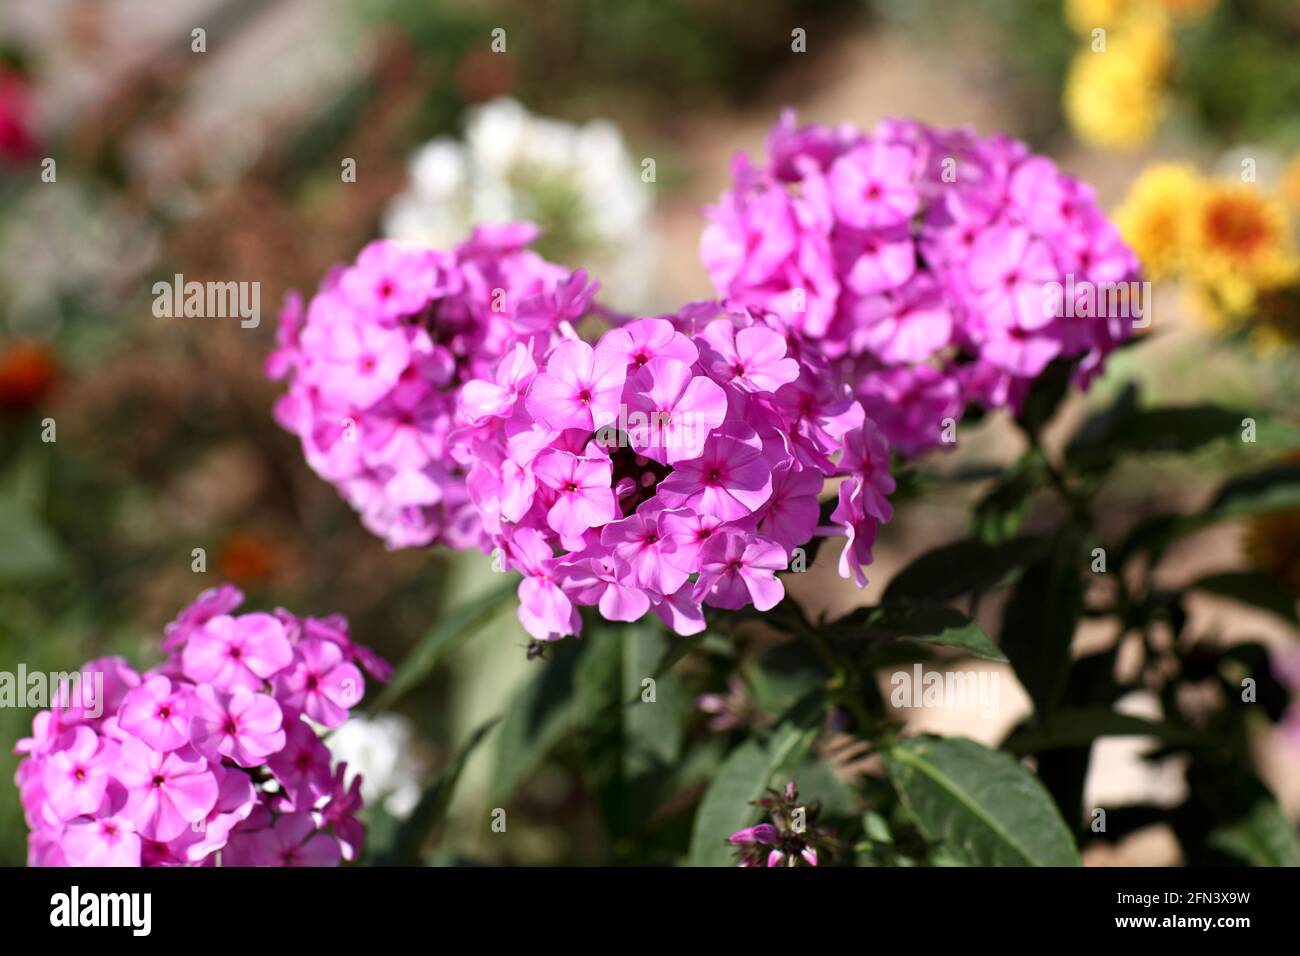 Garden phlox is one of the most recognizable and widely grown perennials Stock Photo